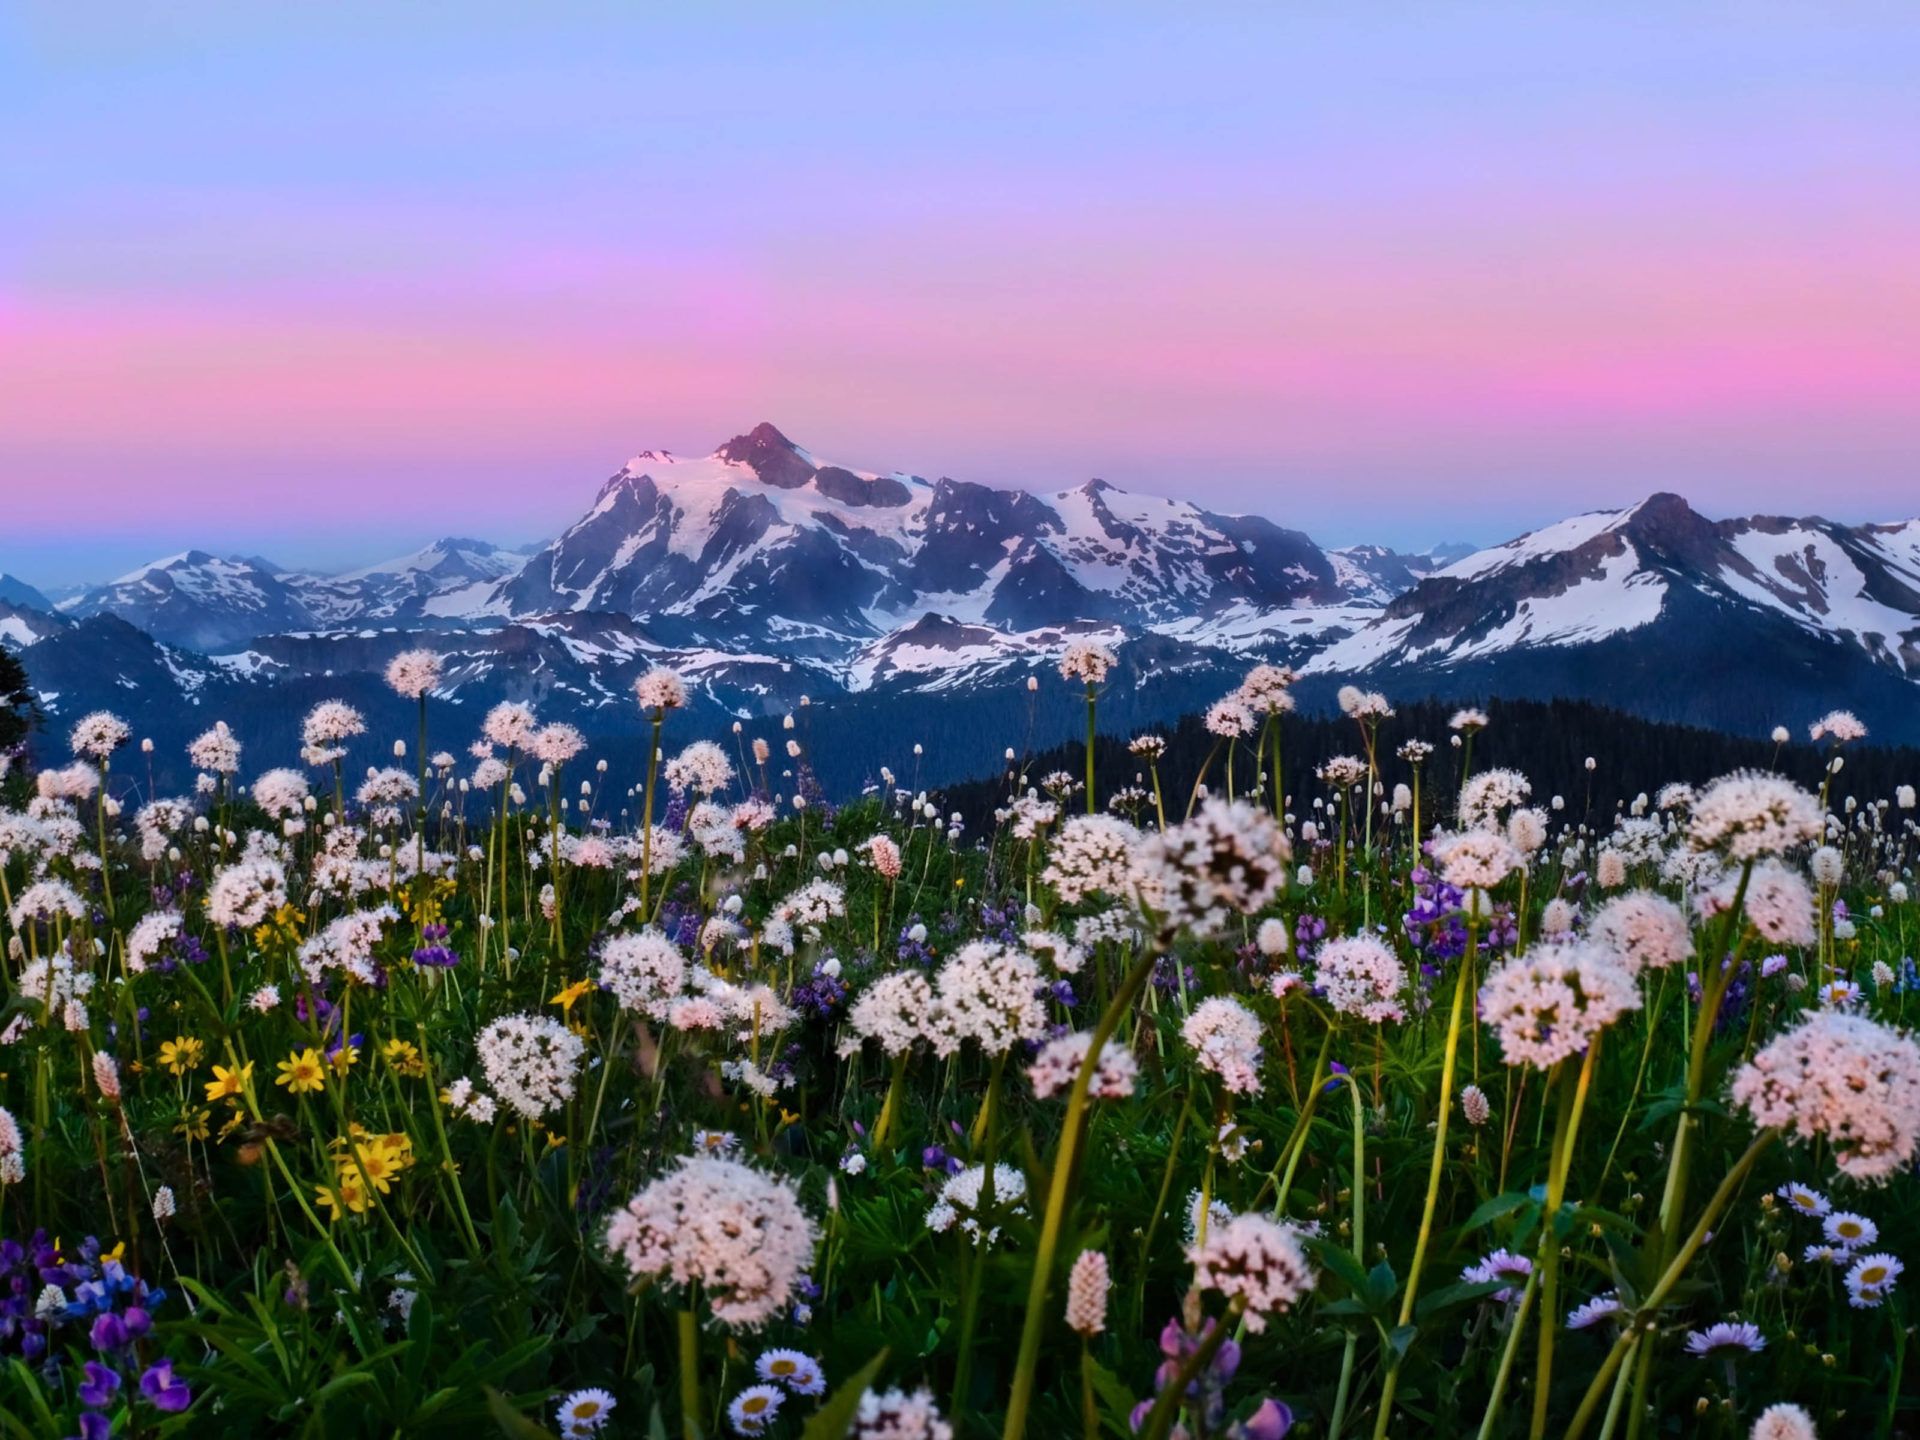 Snow Mountains Alpine Meadows With Wild Flowers North Cascades